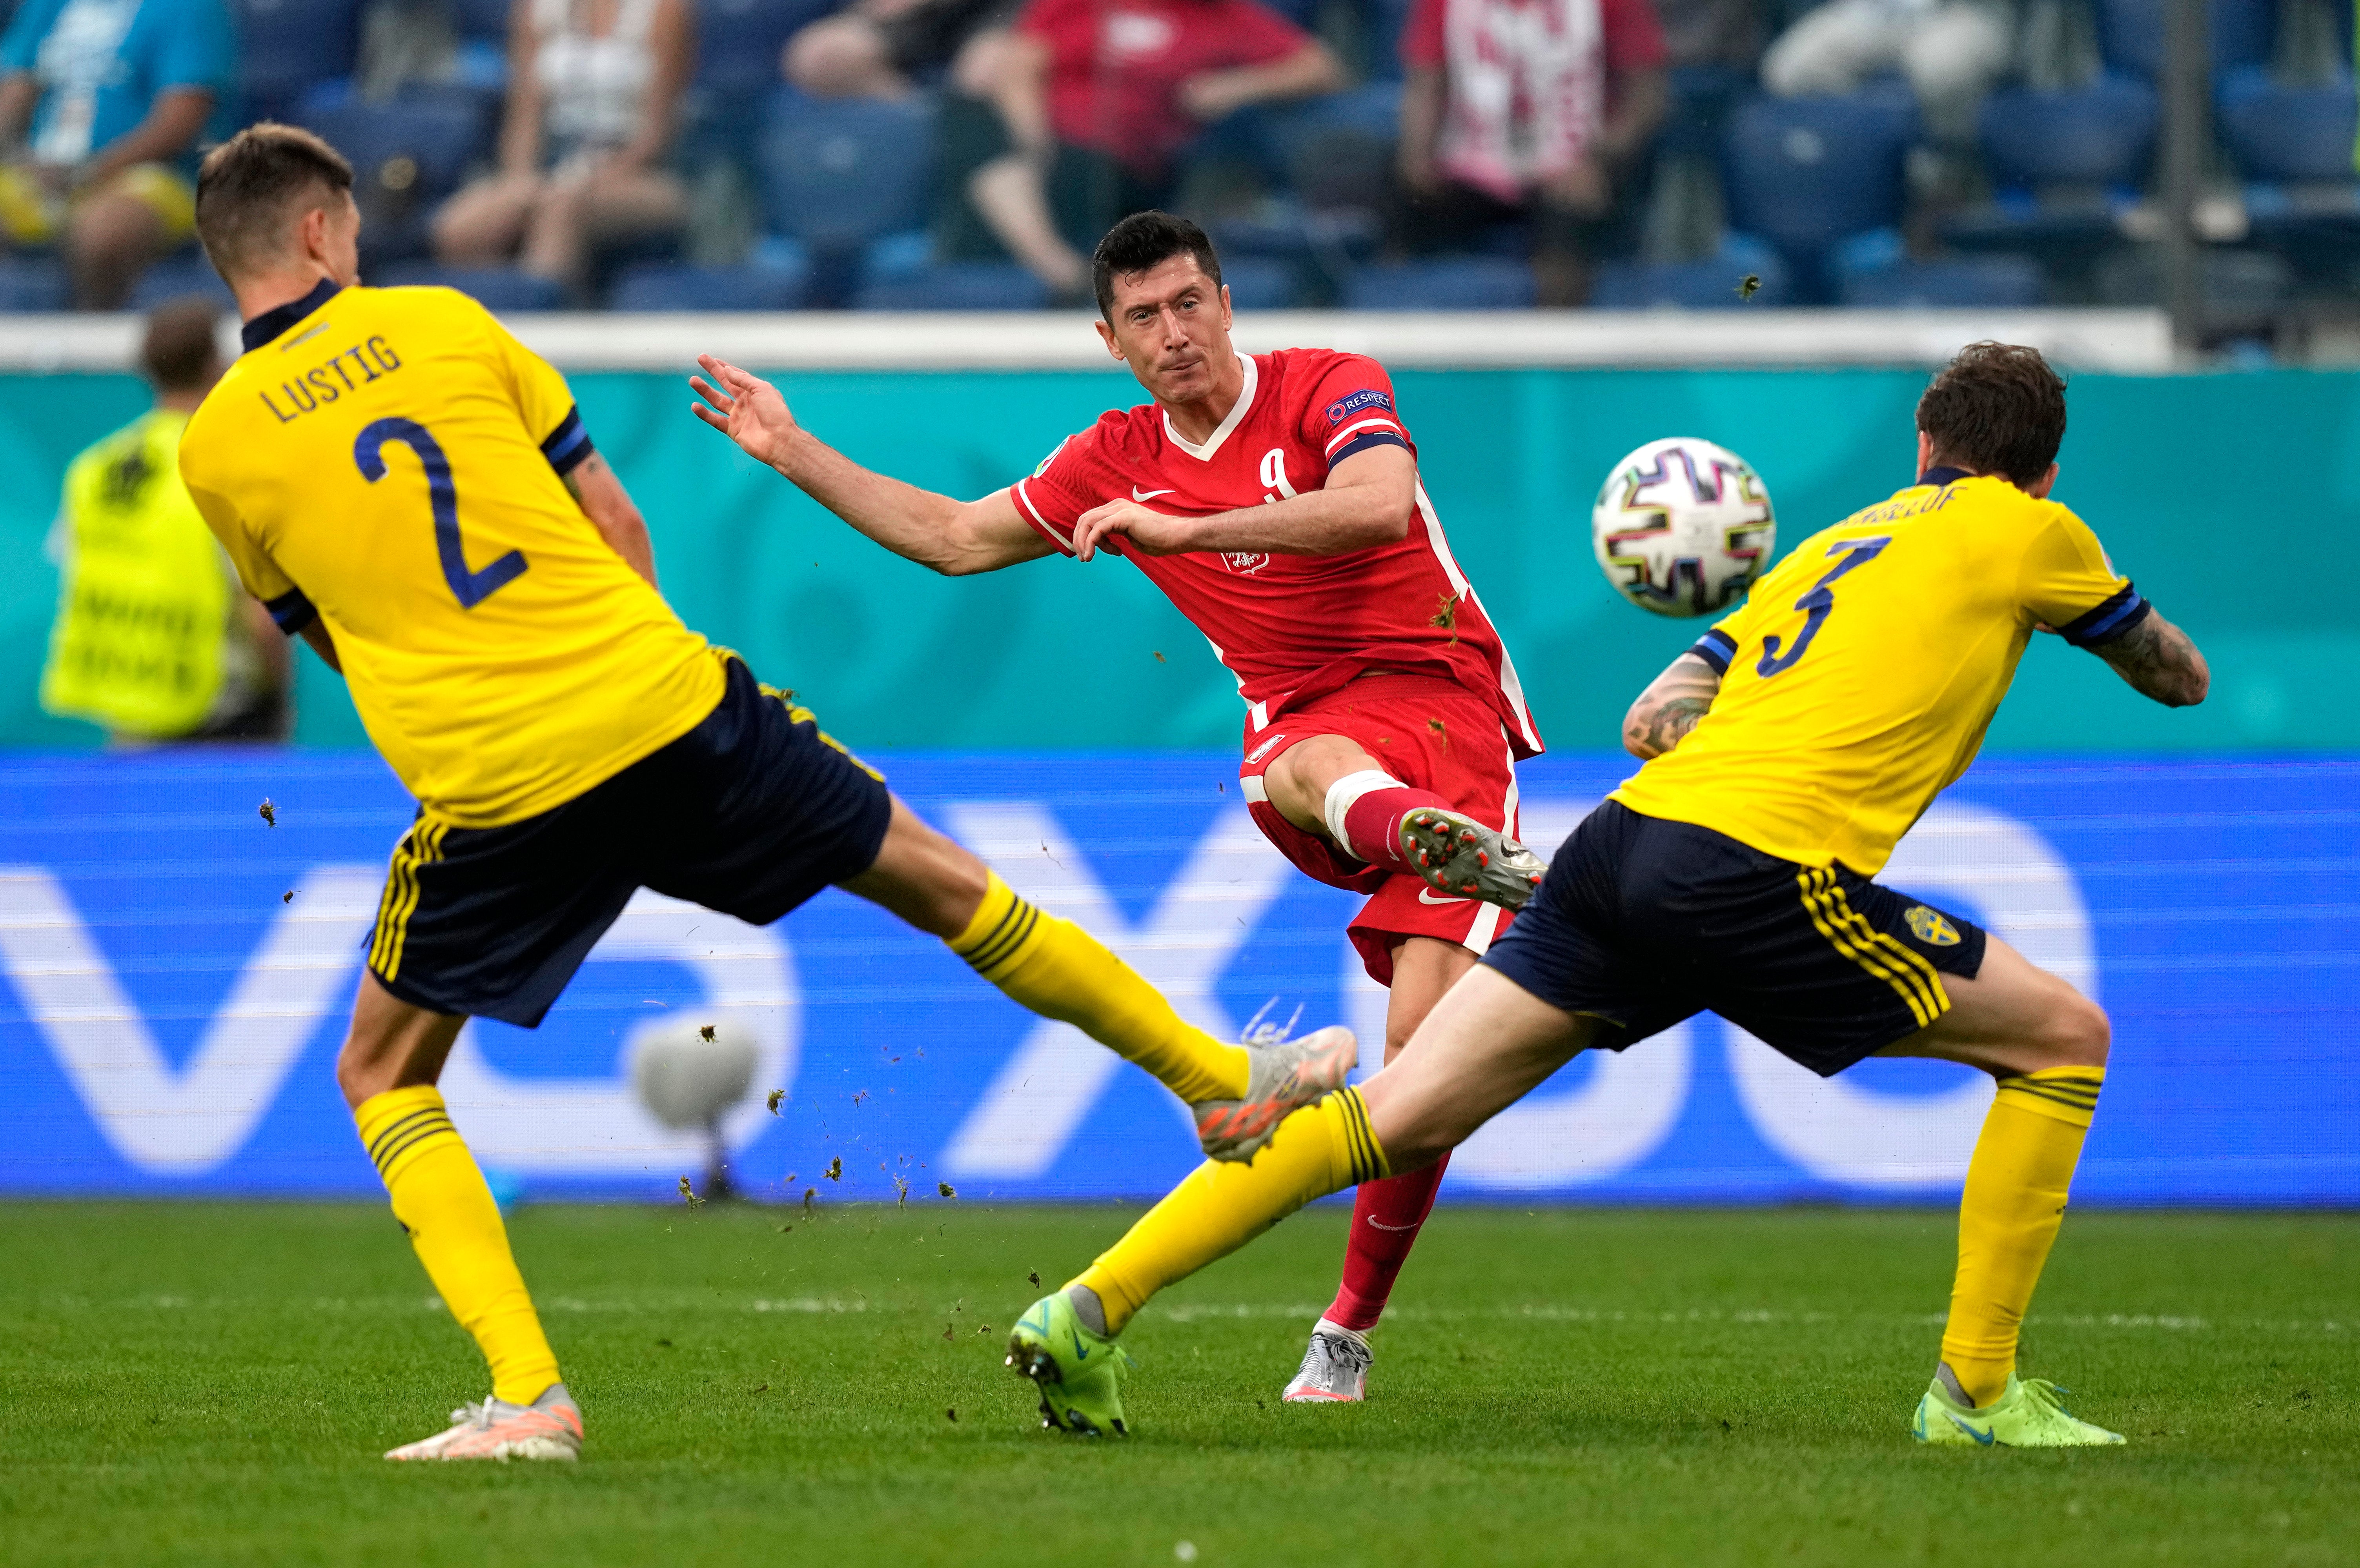 Robert Lewandowski scored twice for Poland in the second half but it was not enough to prevent his team’s elimination